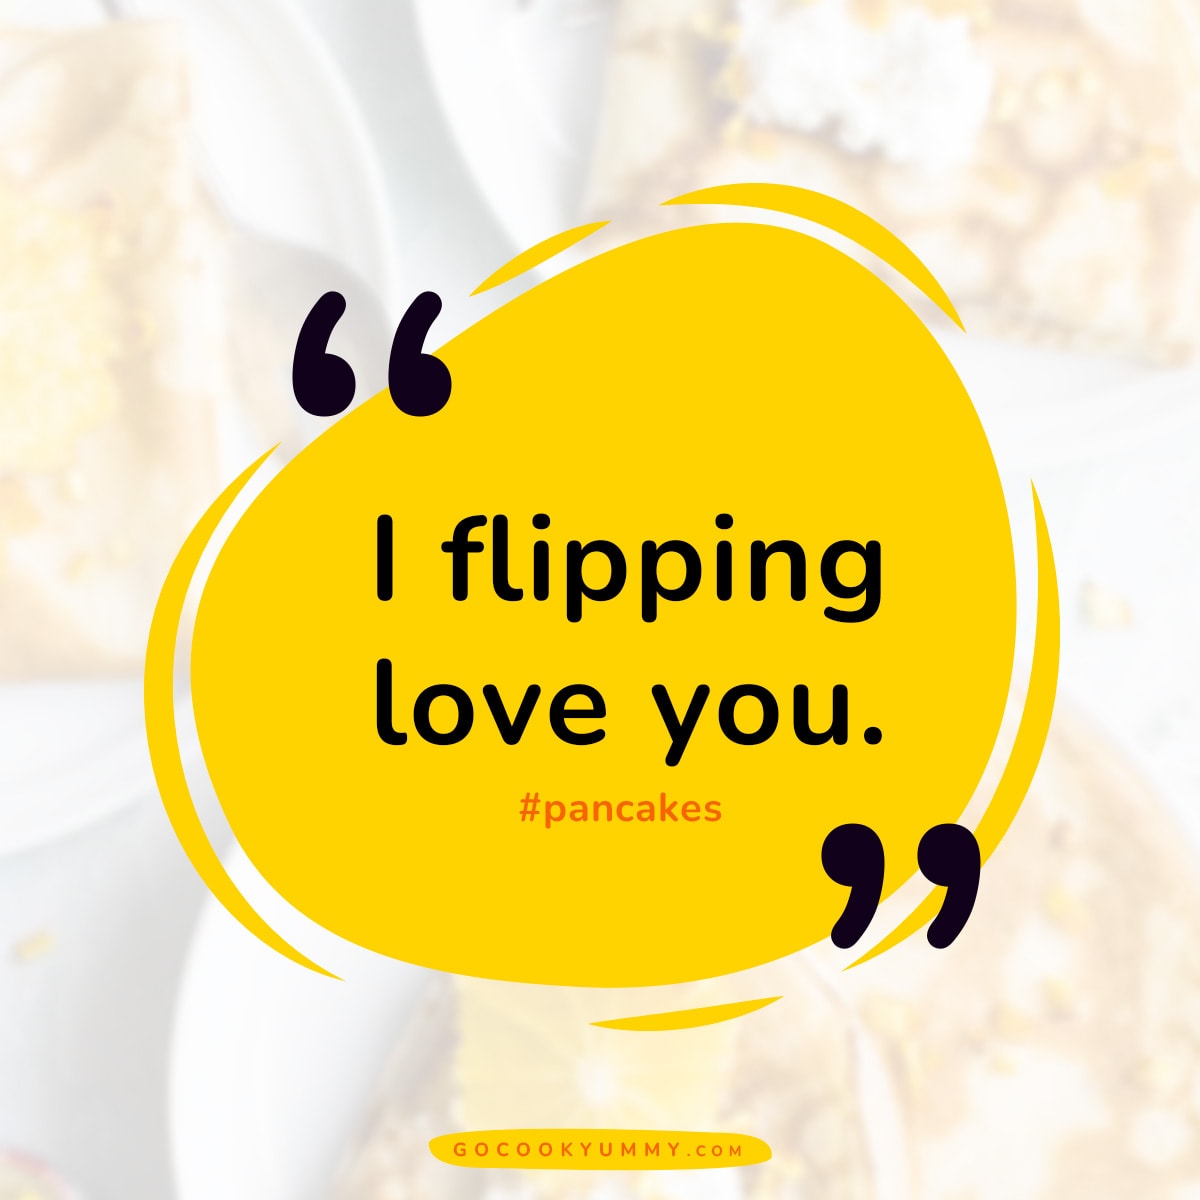 Quote: I flipping love you.